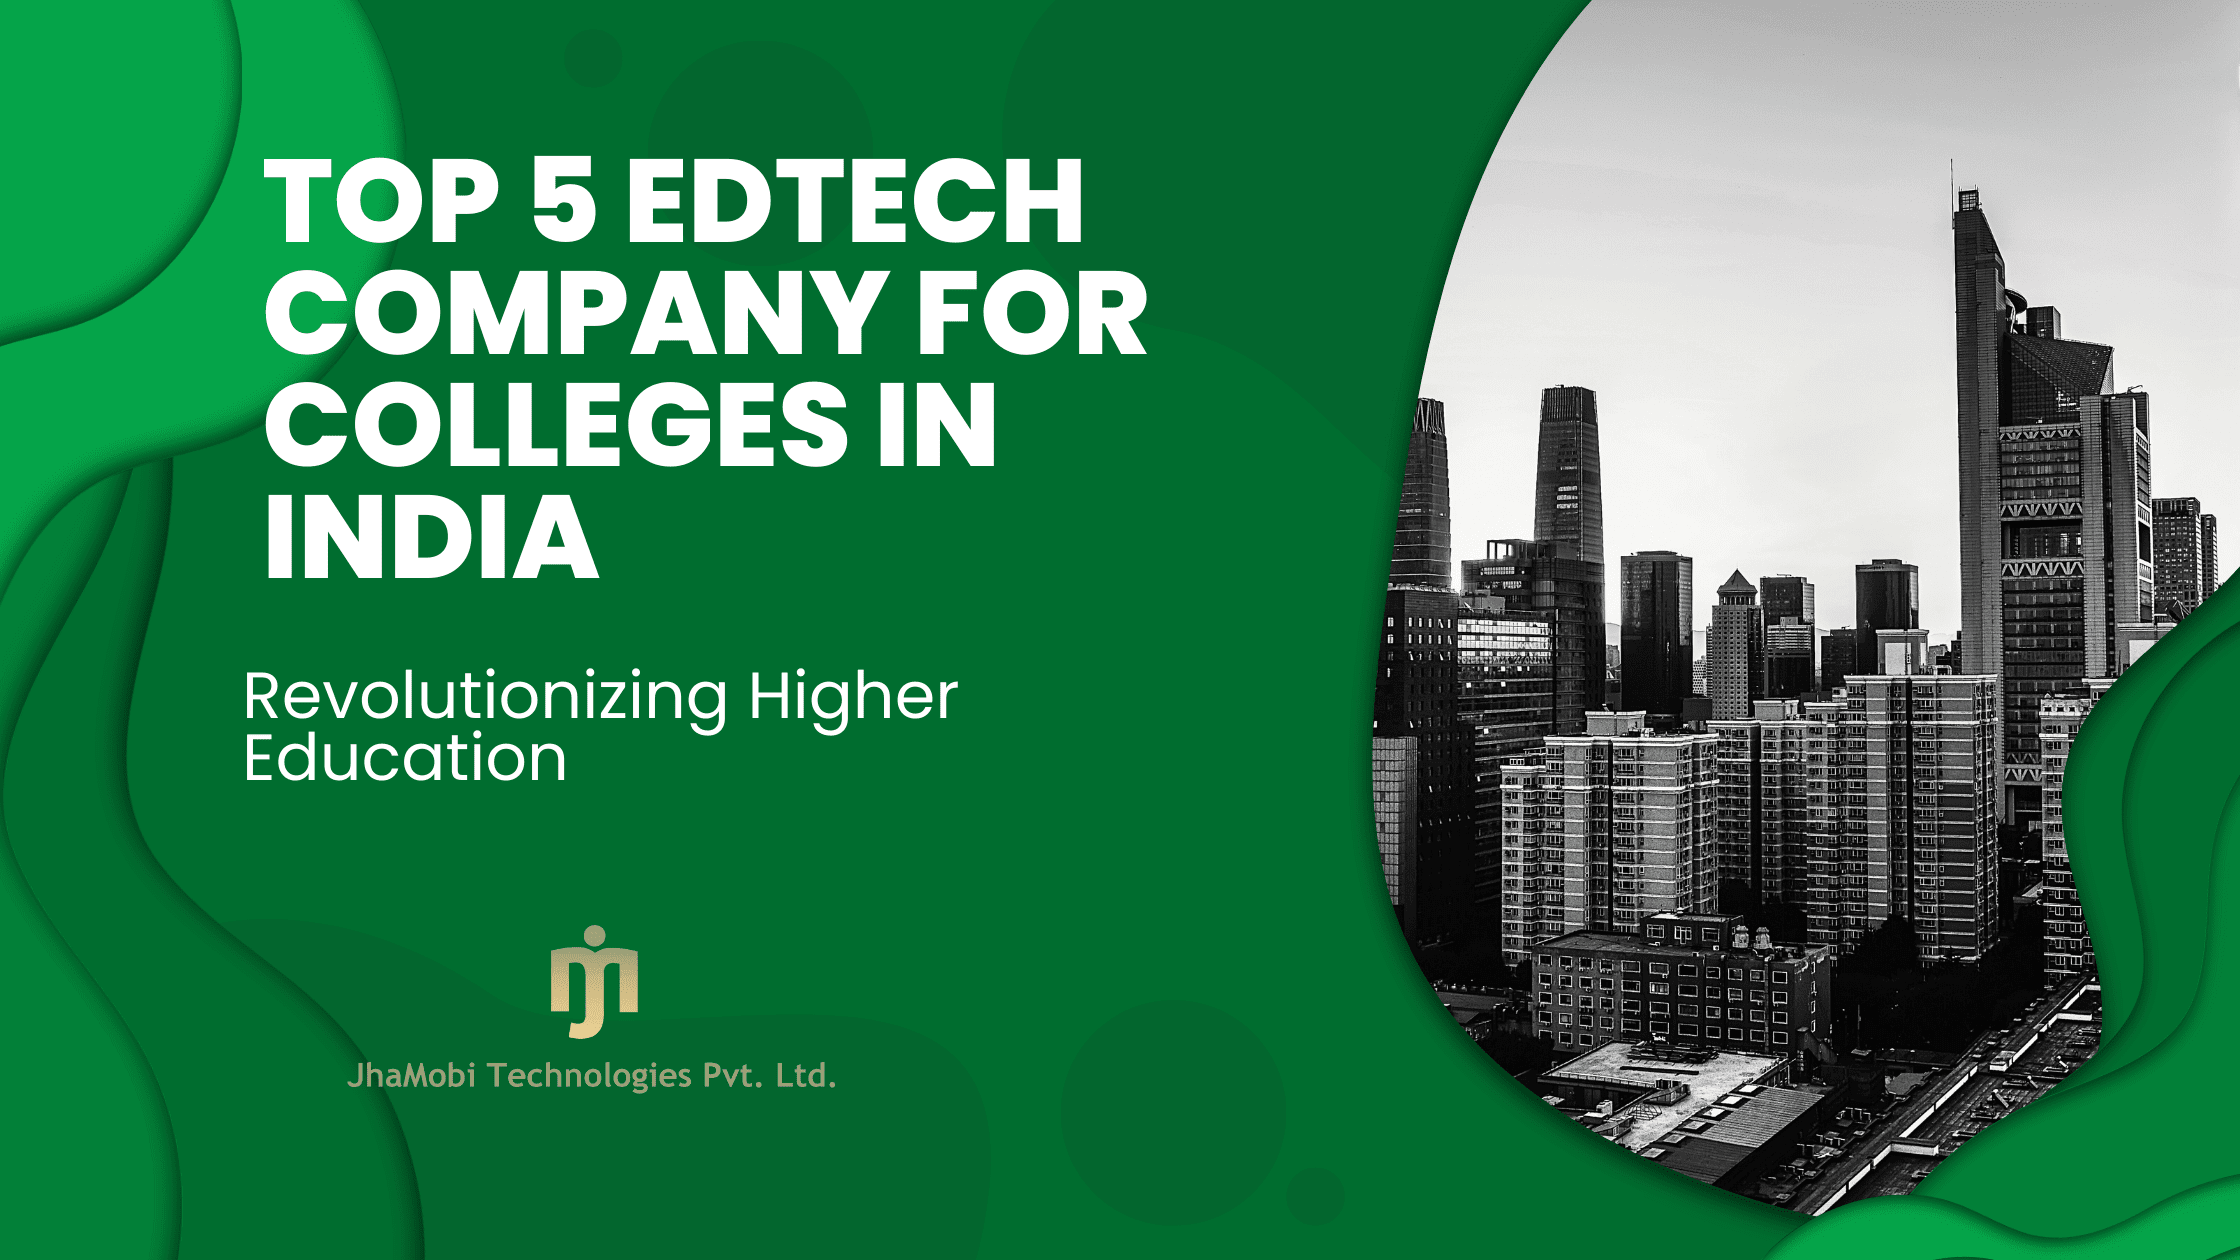 Top 5 EdTech Company for Colleges in India: Revolutionizing Higher Education